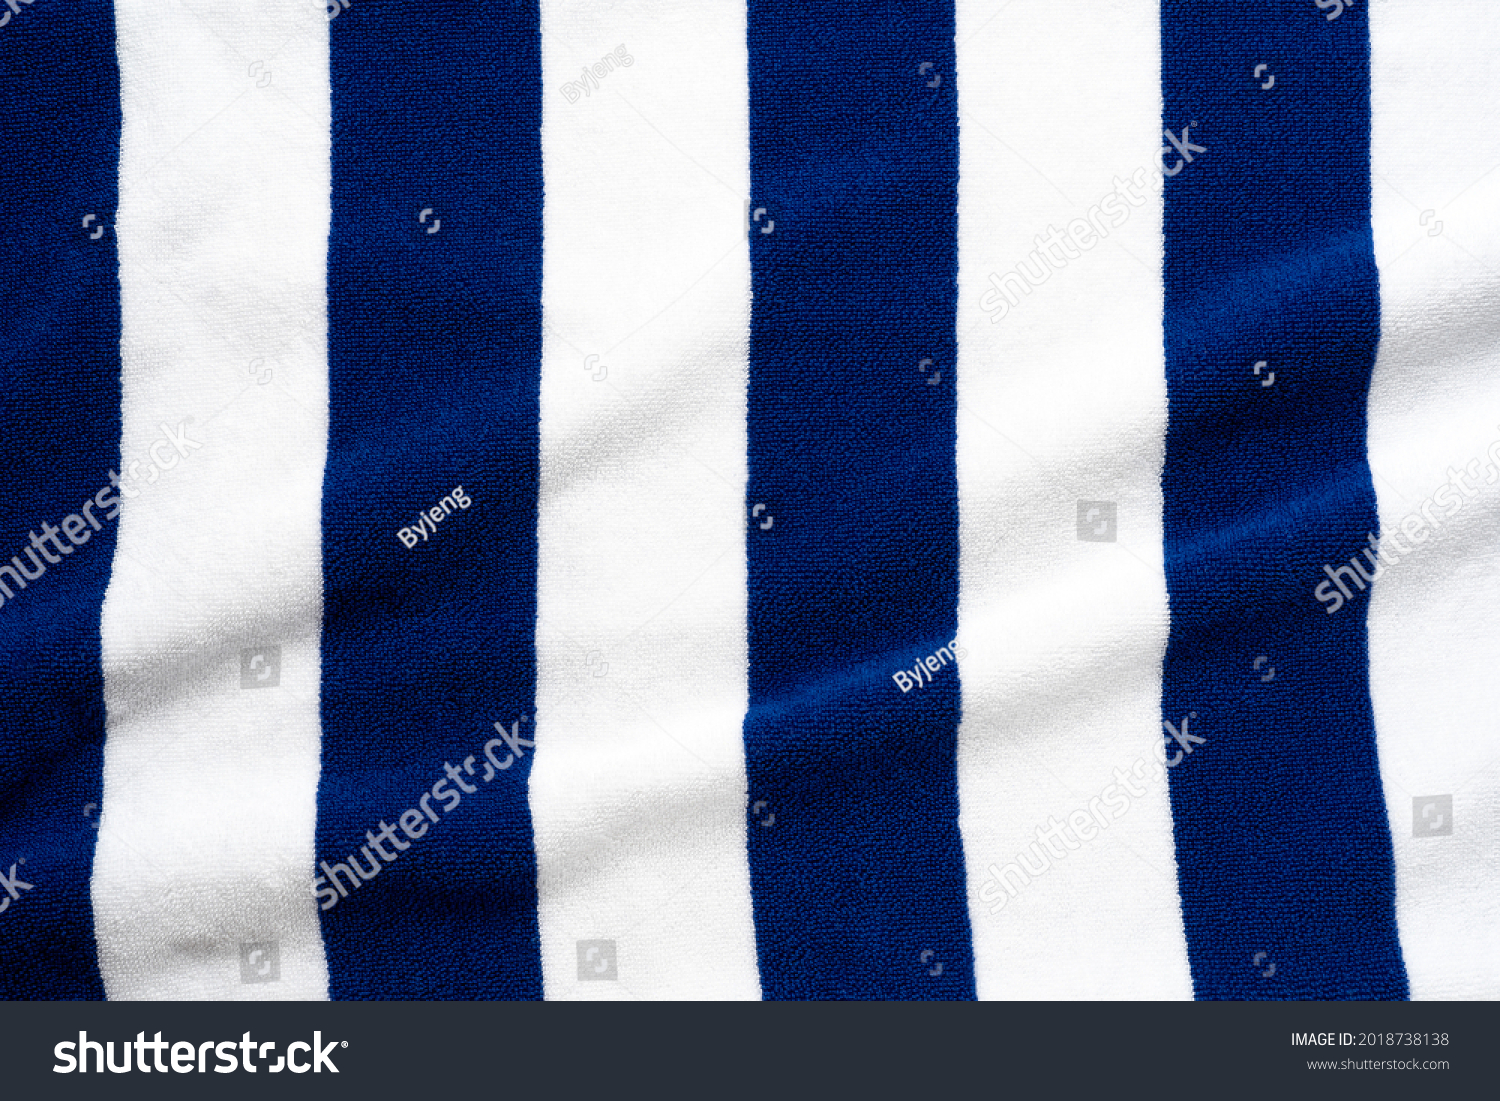 Blue stripes beach towel  mock up isolated on white background, flat lay top view shot #2018738138